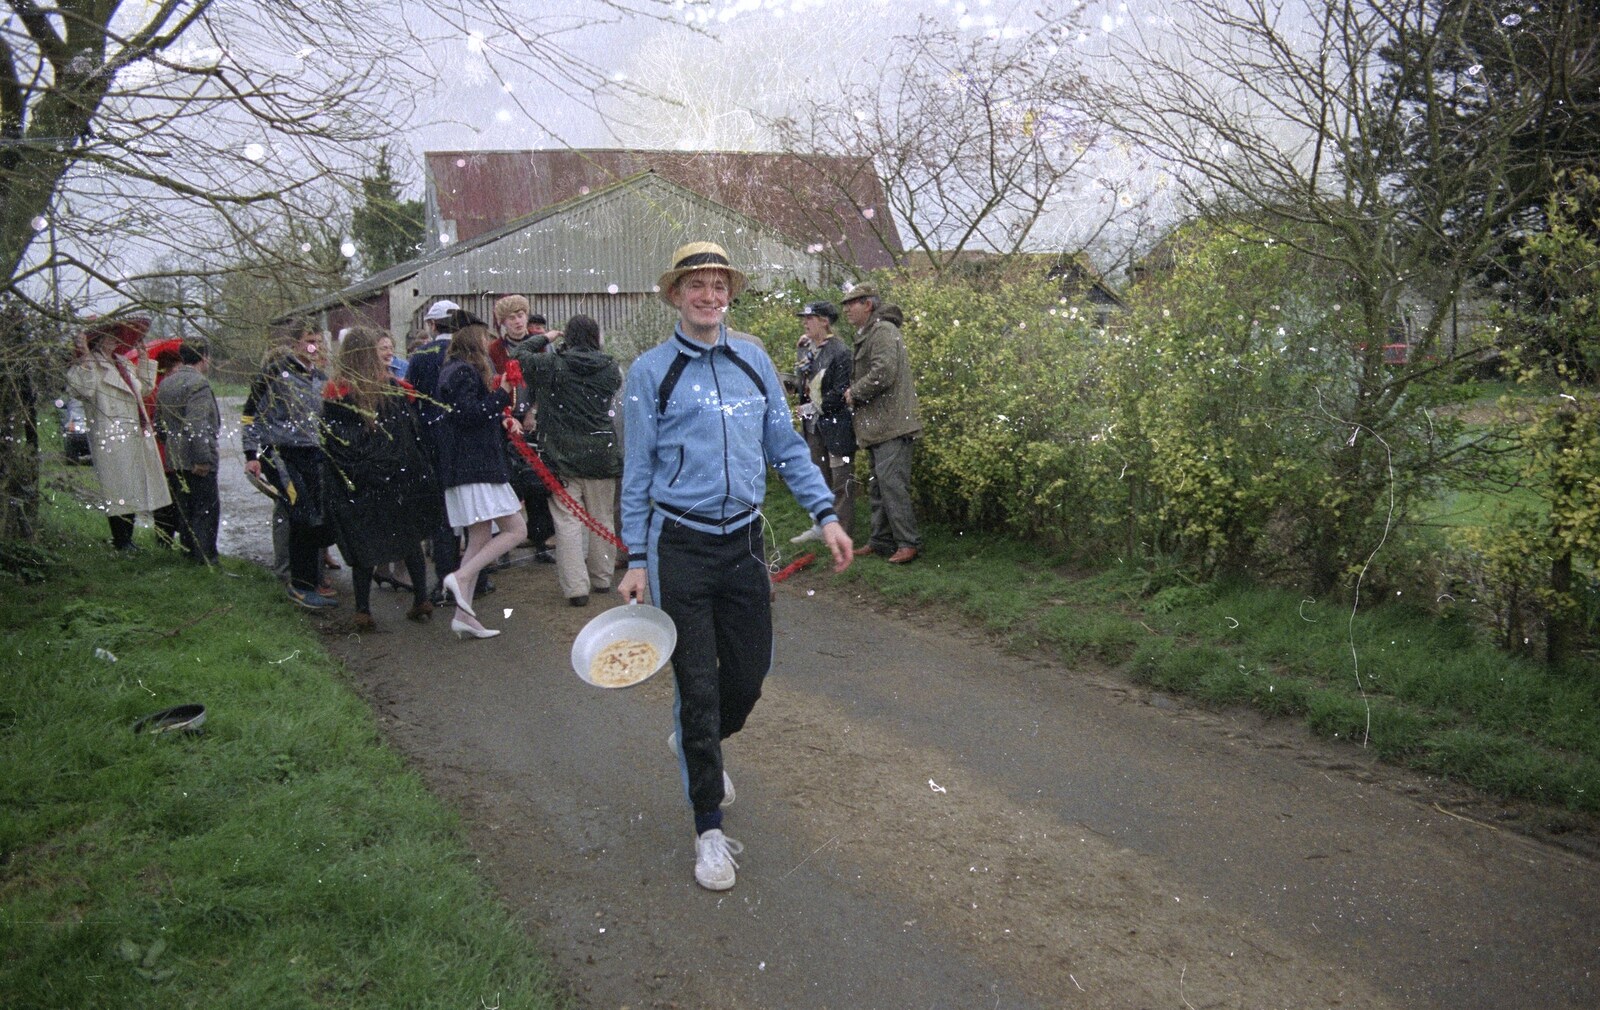 Nosher and his frying pan from Pancake Day in Starston, Norfolk - 27th February 1990